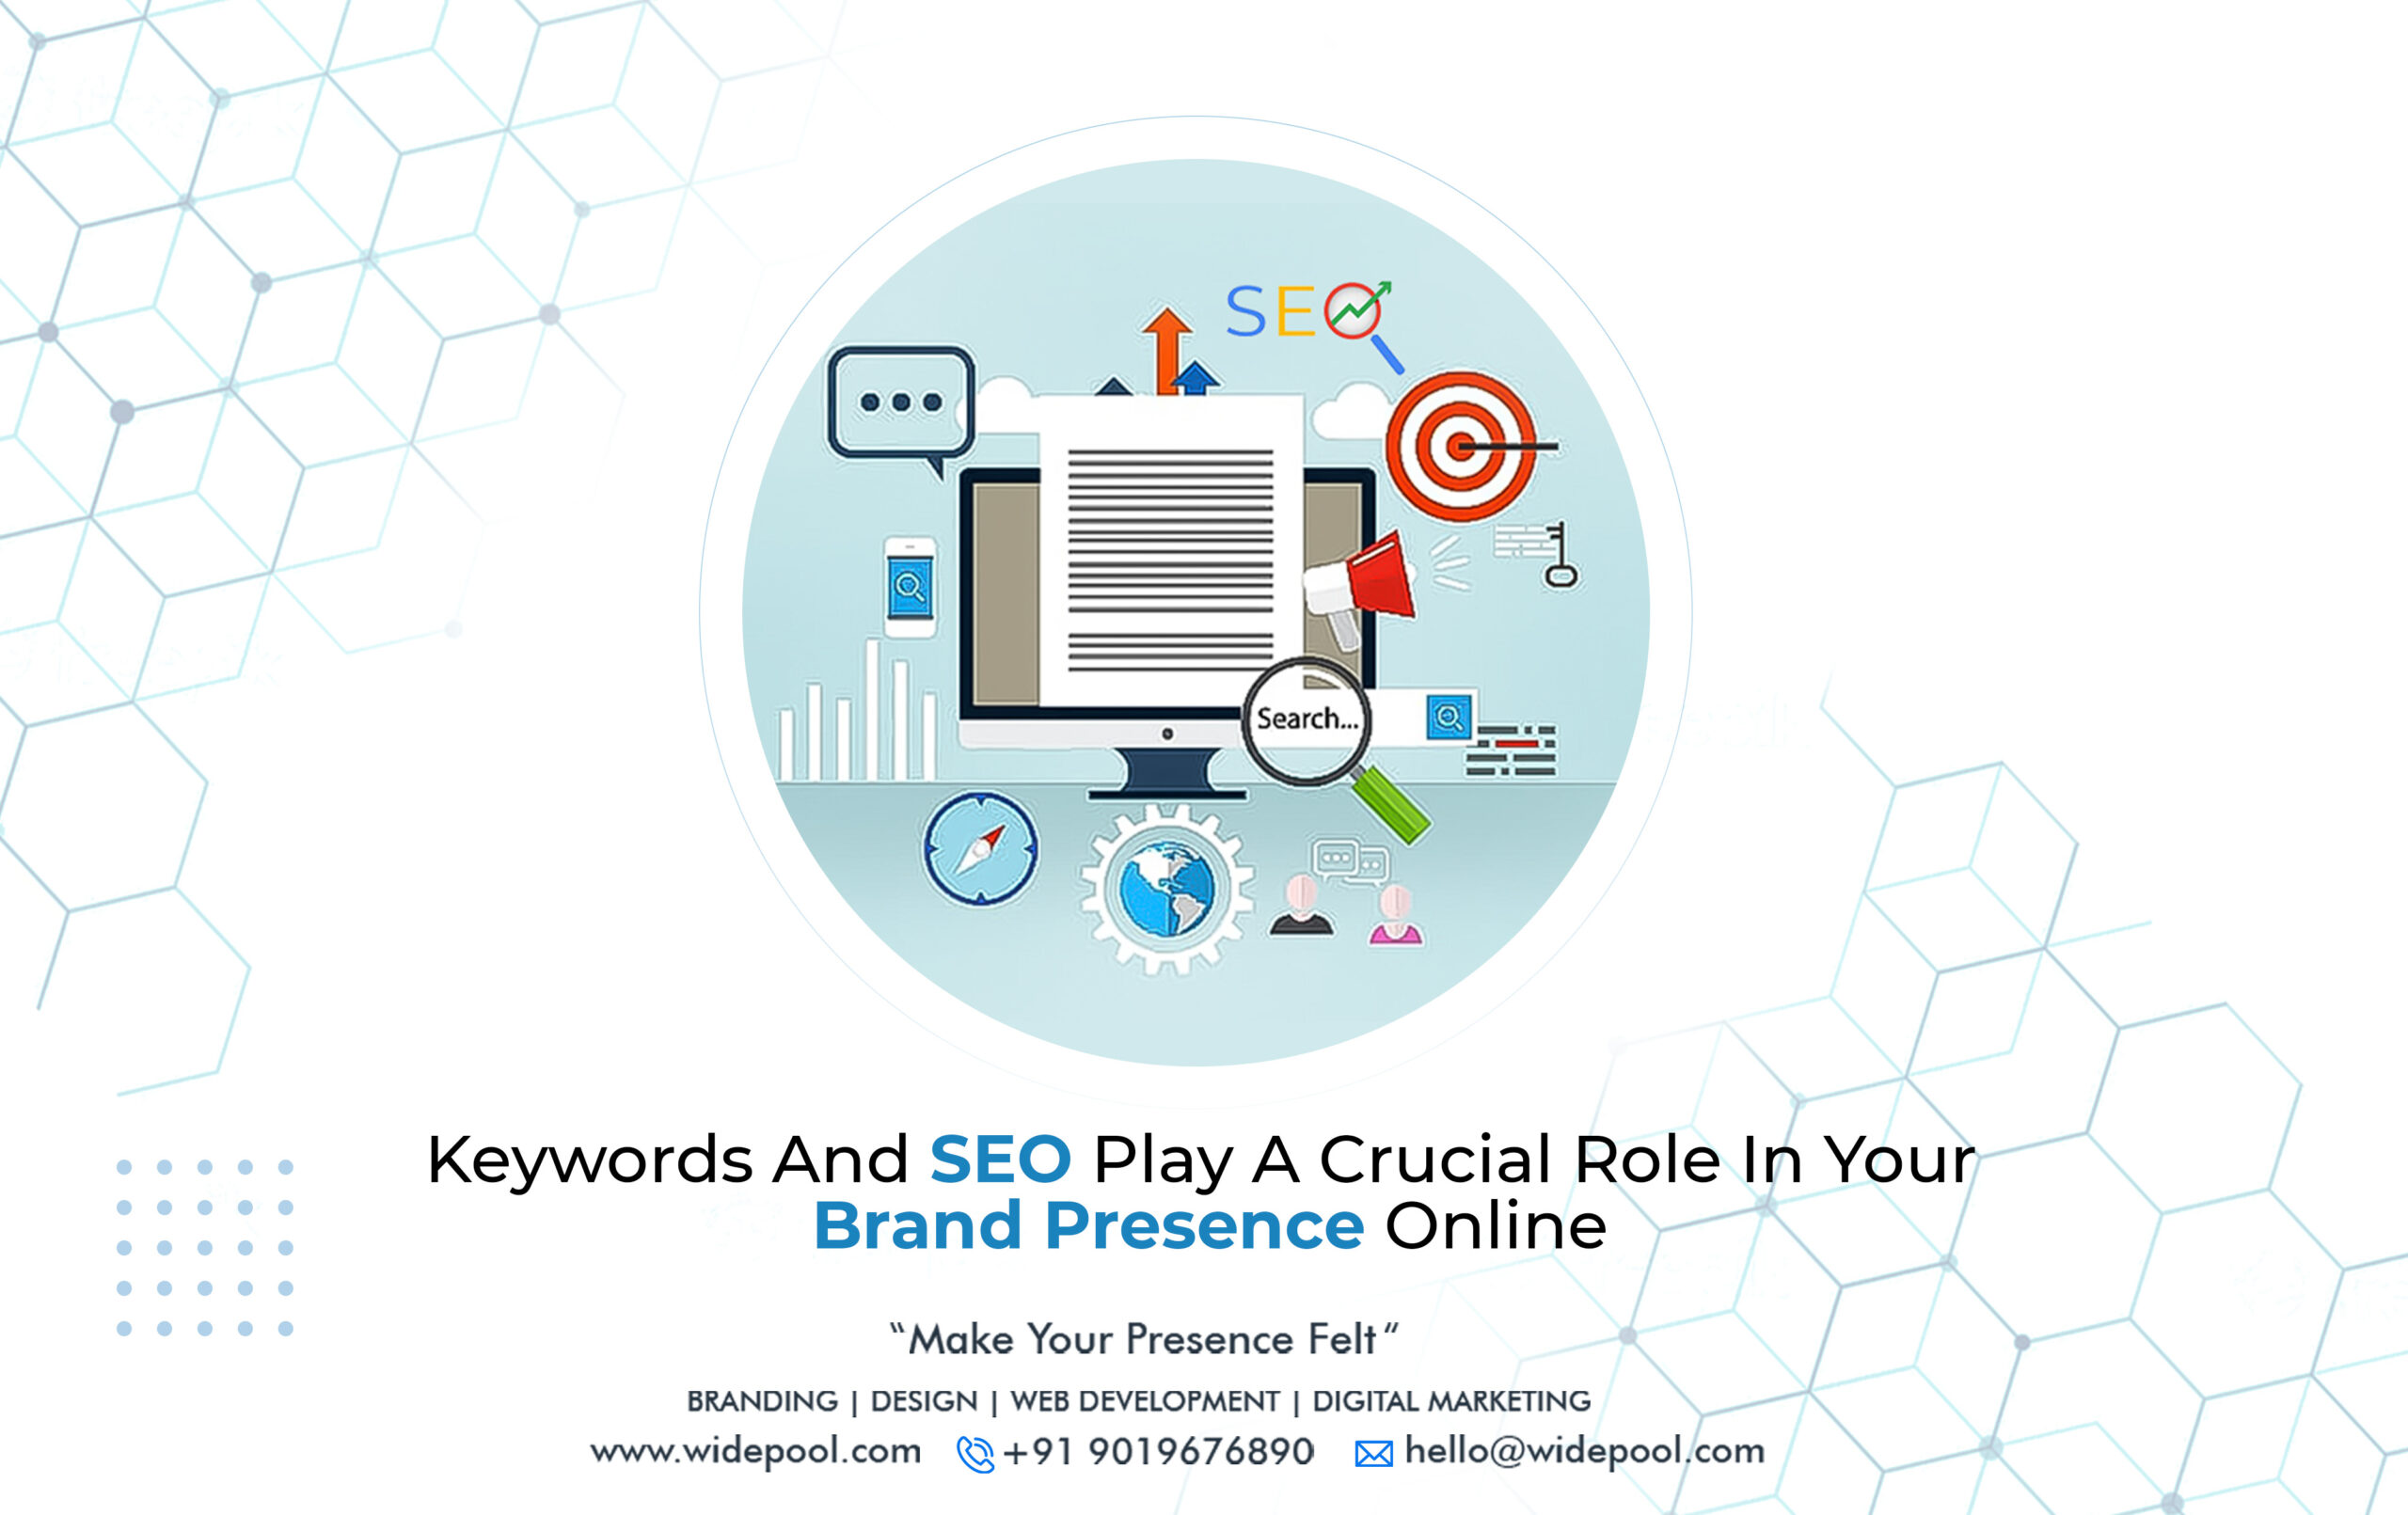 Keywords and SEO Play a Crucial Role in Your Brand Presence Online